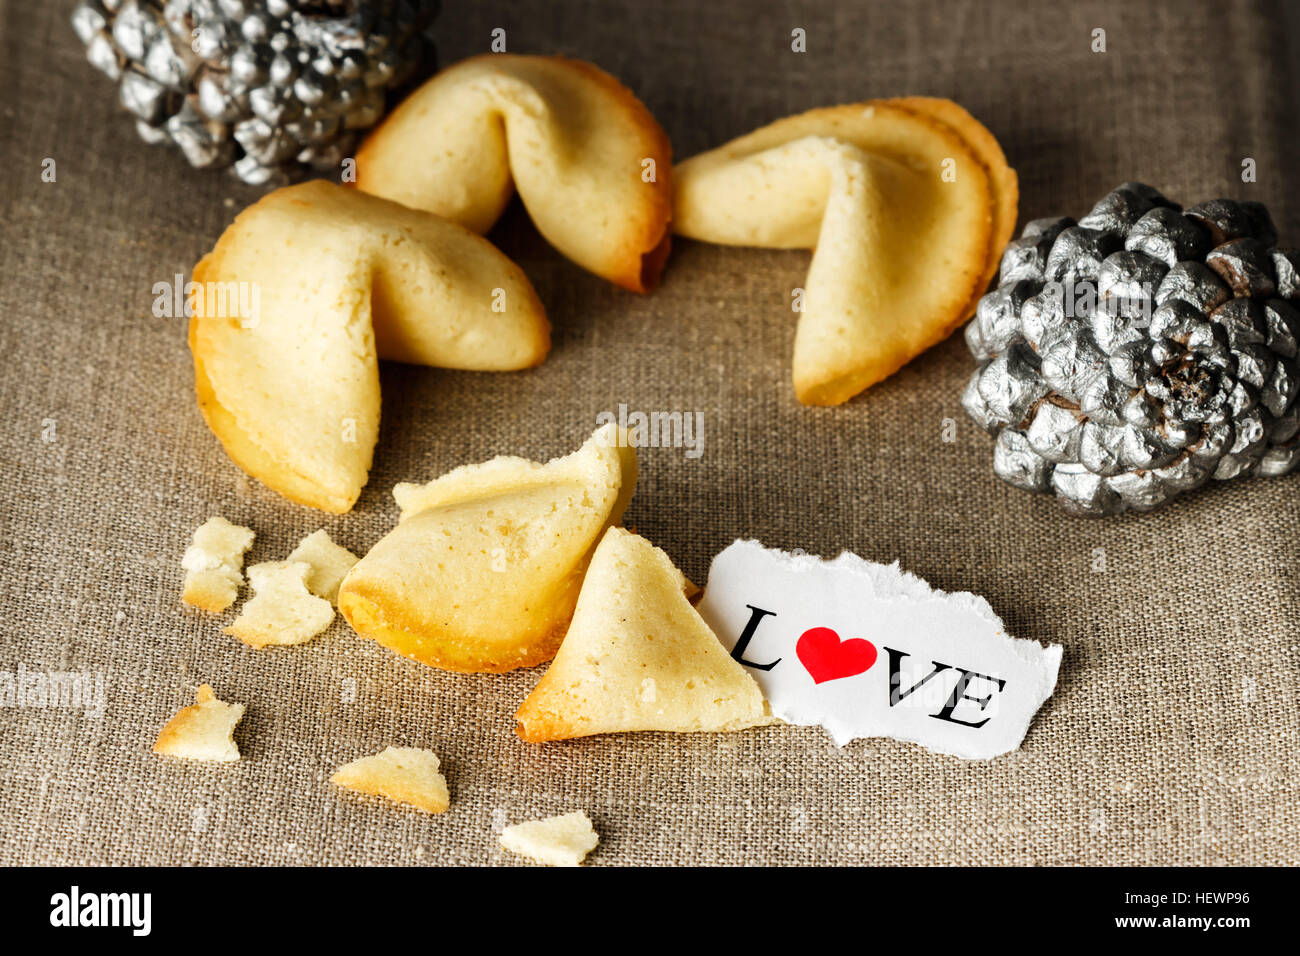 Cookies shaped like tortellini with the word love written on a paper and two silver pineapples in the background.Horizontal image. Stock Photo